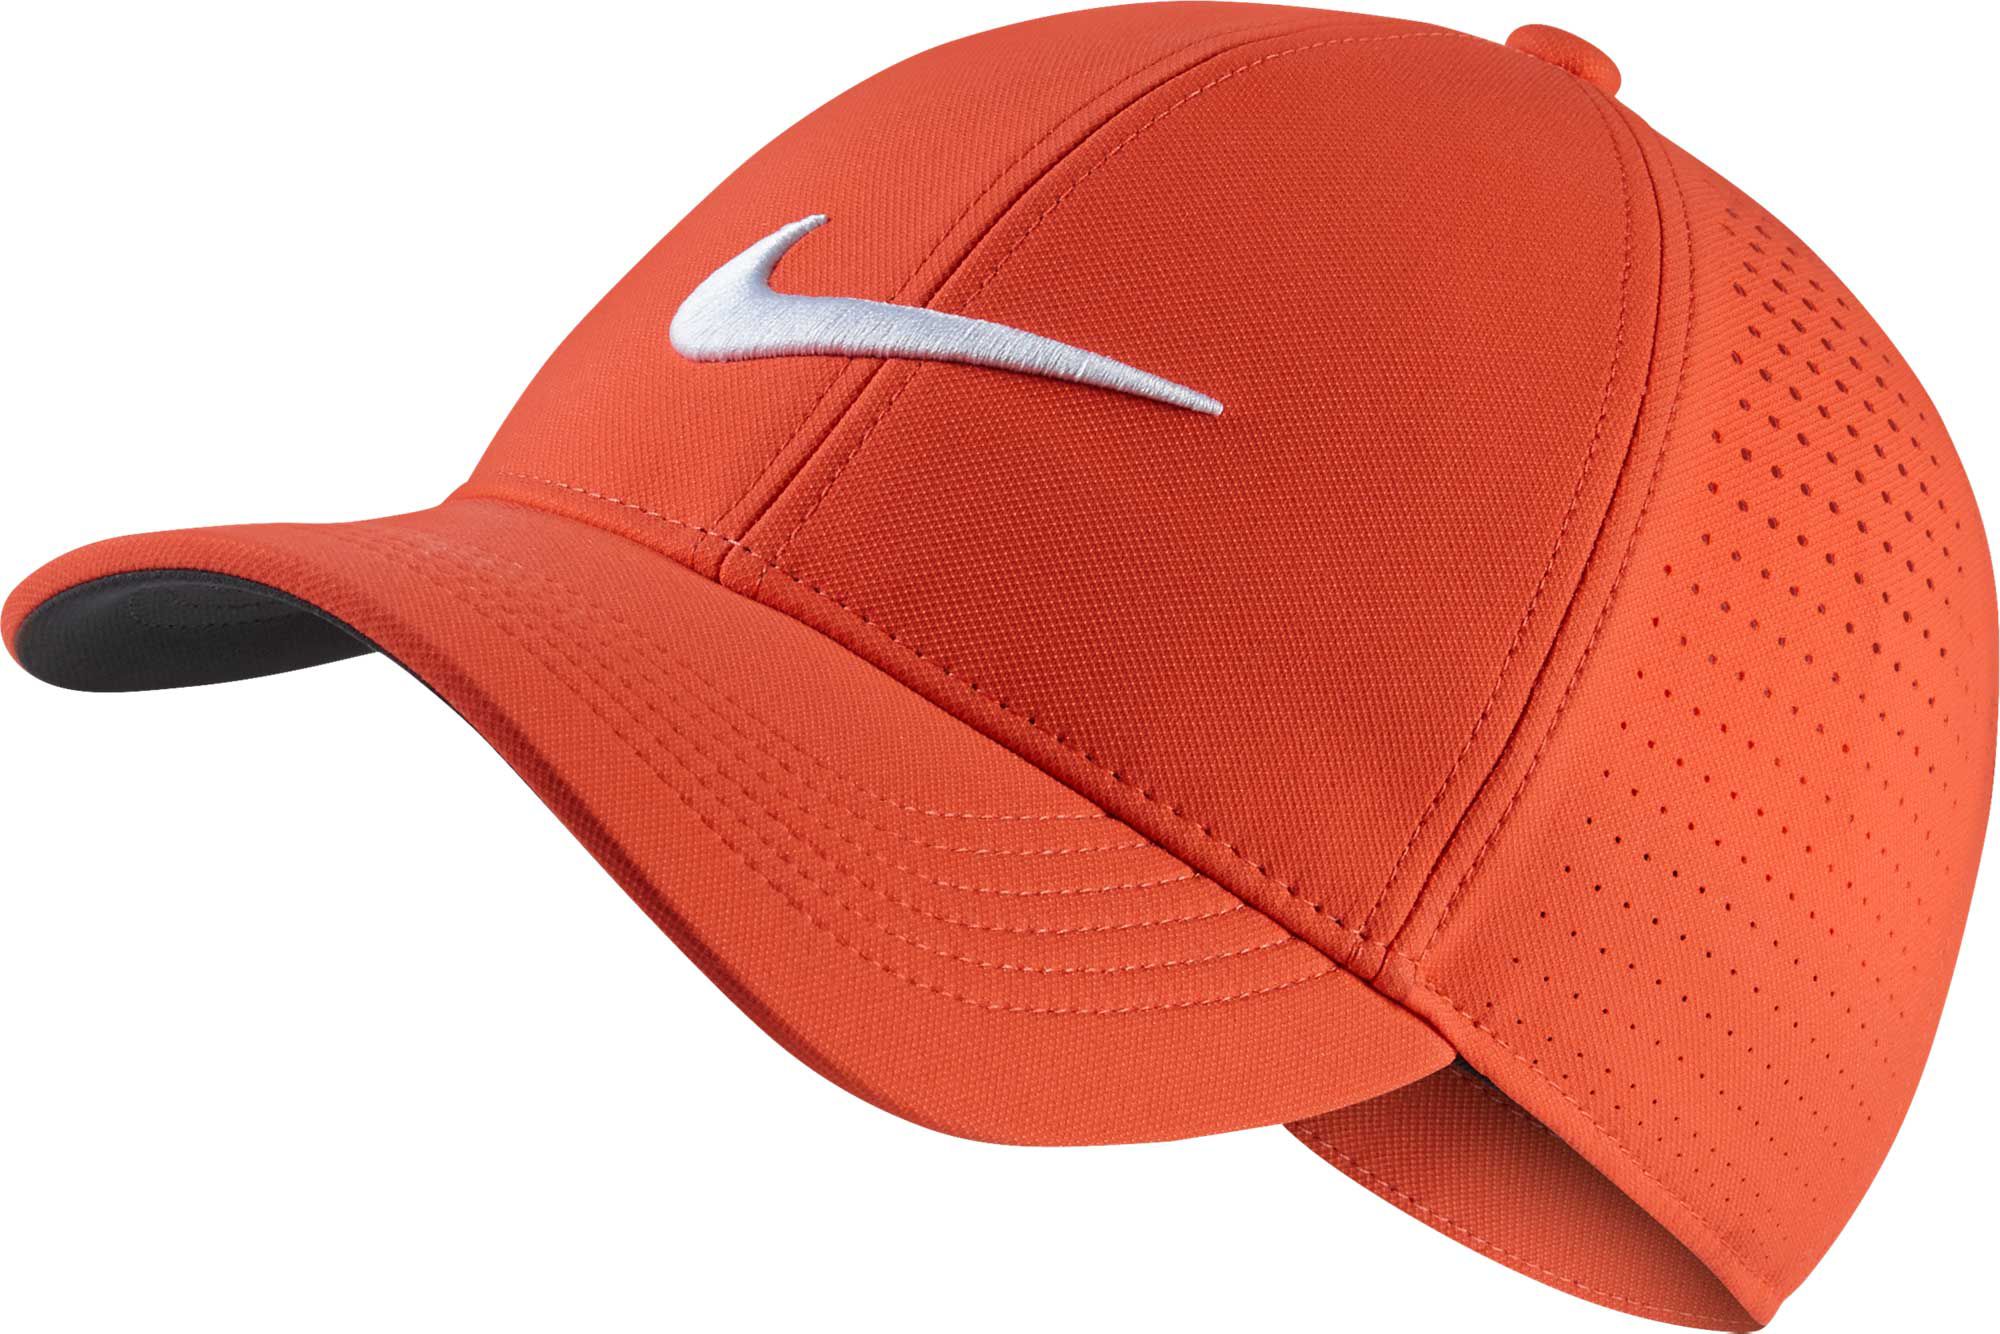 Golf Hats | Best Price Guarantee at DICK'S